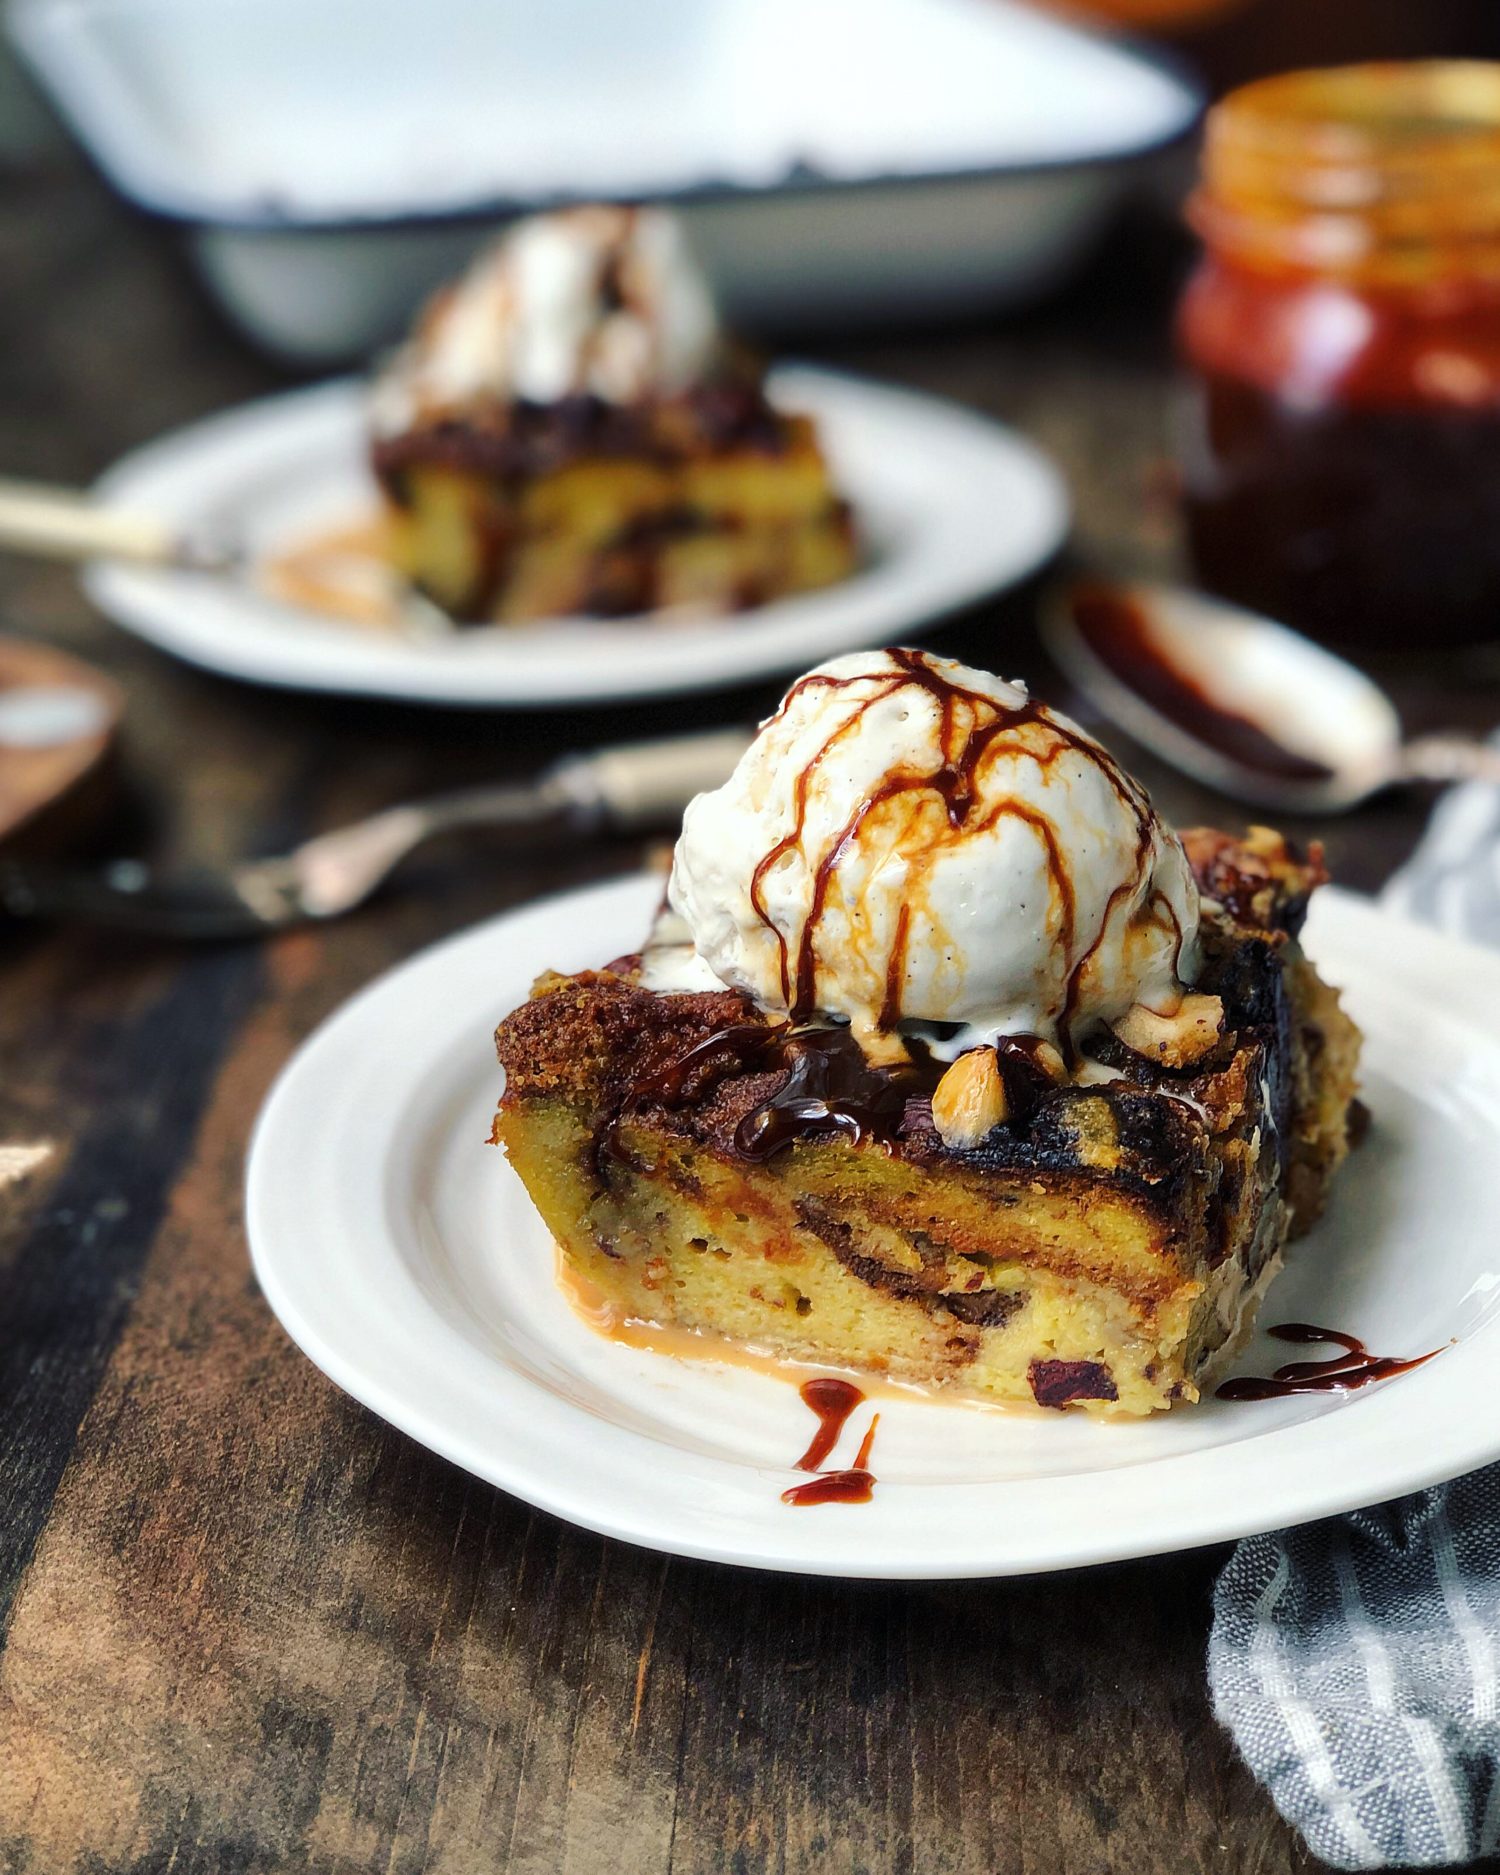 Chocolate Bread Pudding with Hazelnuts and Caramel Sauce